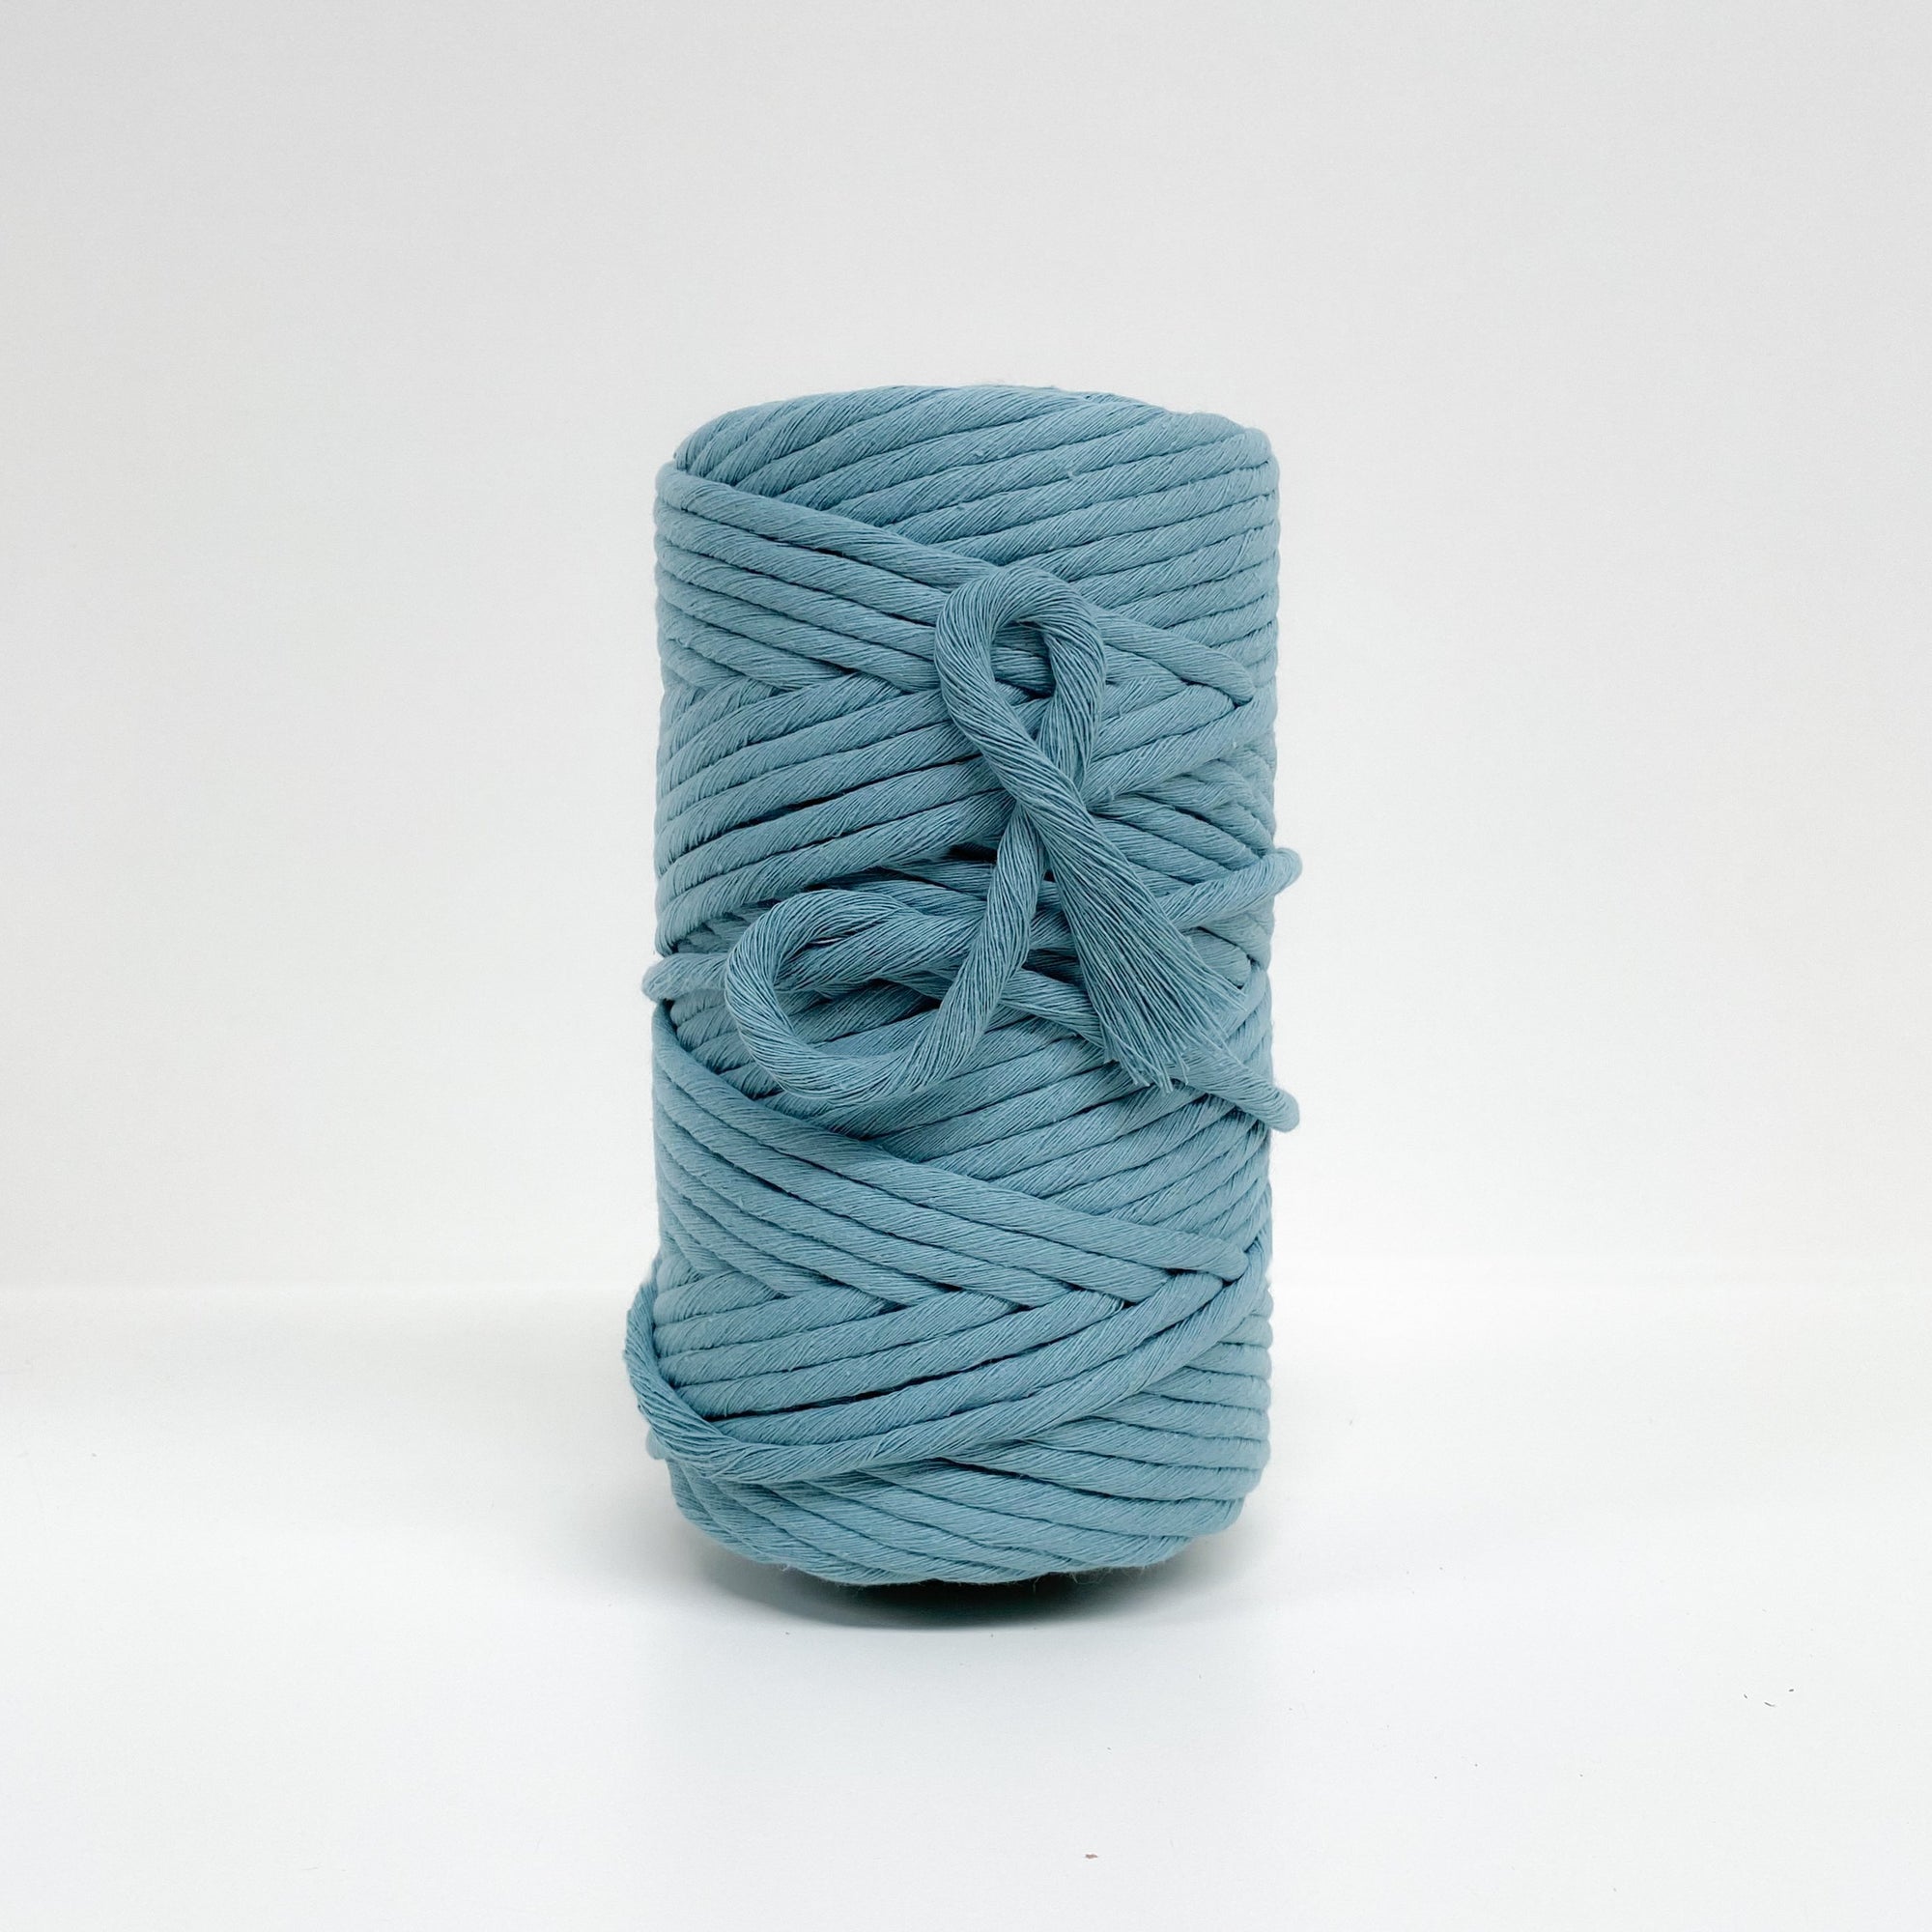 Mary Maker Studio Luxe Colour Cotton 8mm 1KG 8mm Recycled Luxe Macrame String // Teal macrame cotton macrame rope macrame workshop macrame patterns macrame